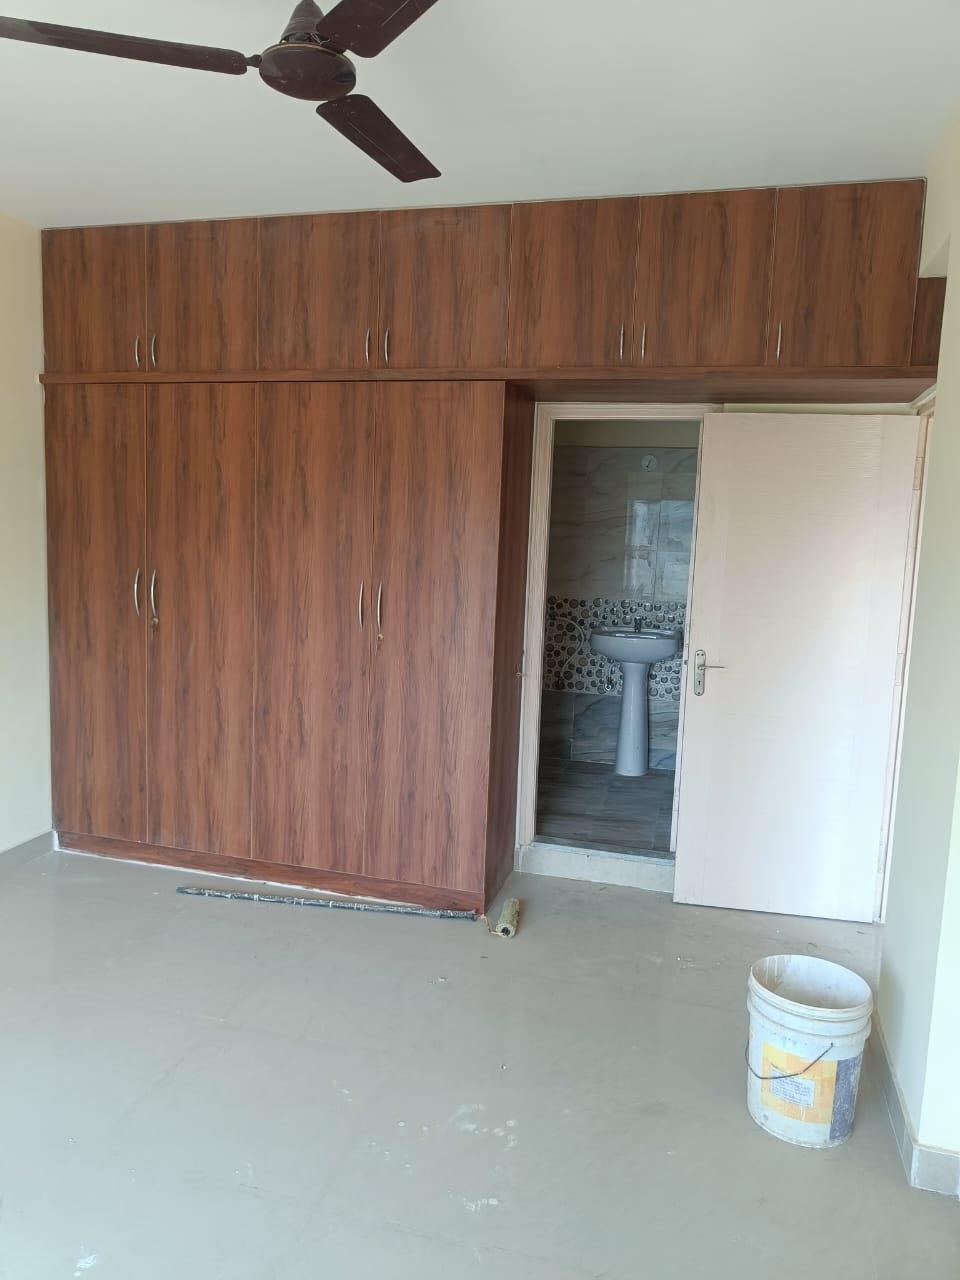 2 BHK Residential Apartment for Lease Only at JAML2 - 1474 in Hoodi